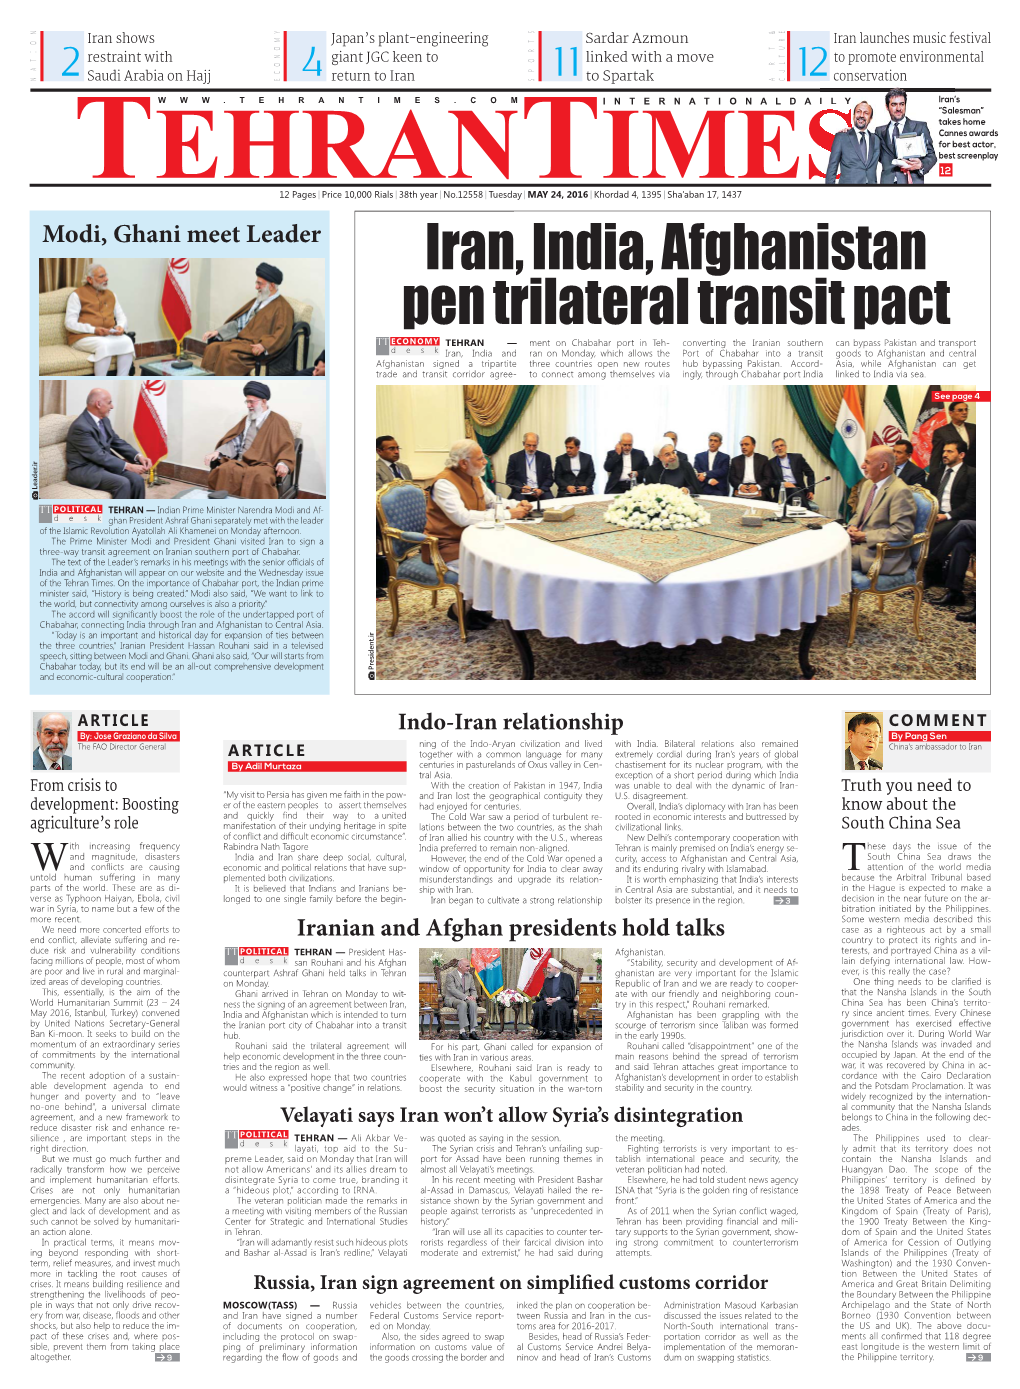 Iran, India, Afghanistan Pen Trilateral Transit Pact